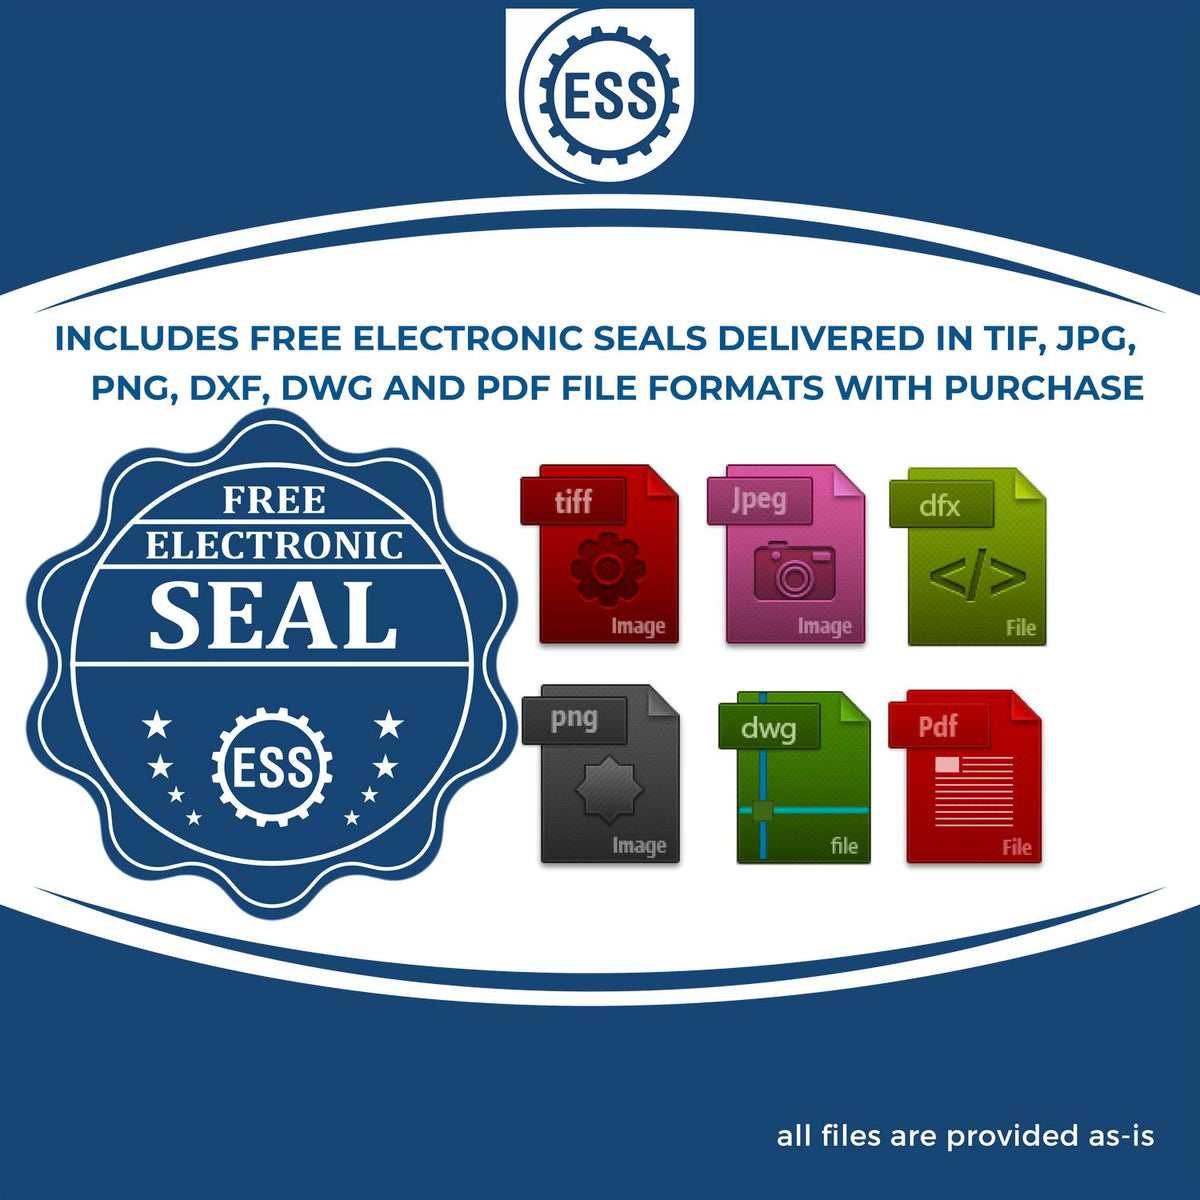 An infographic for the free electronic seal for the Hybrid Vermont Geologist Seal illustrating the different file type icons such as DXF, DWG, TIF, JPG and PNG.